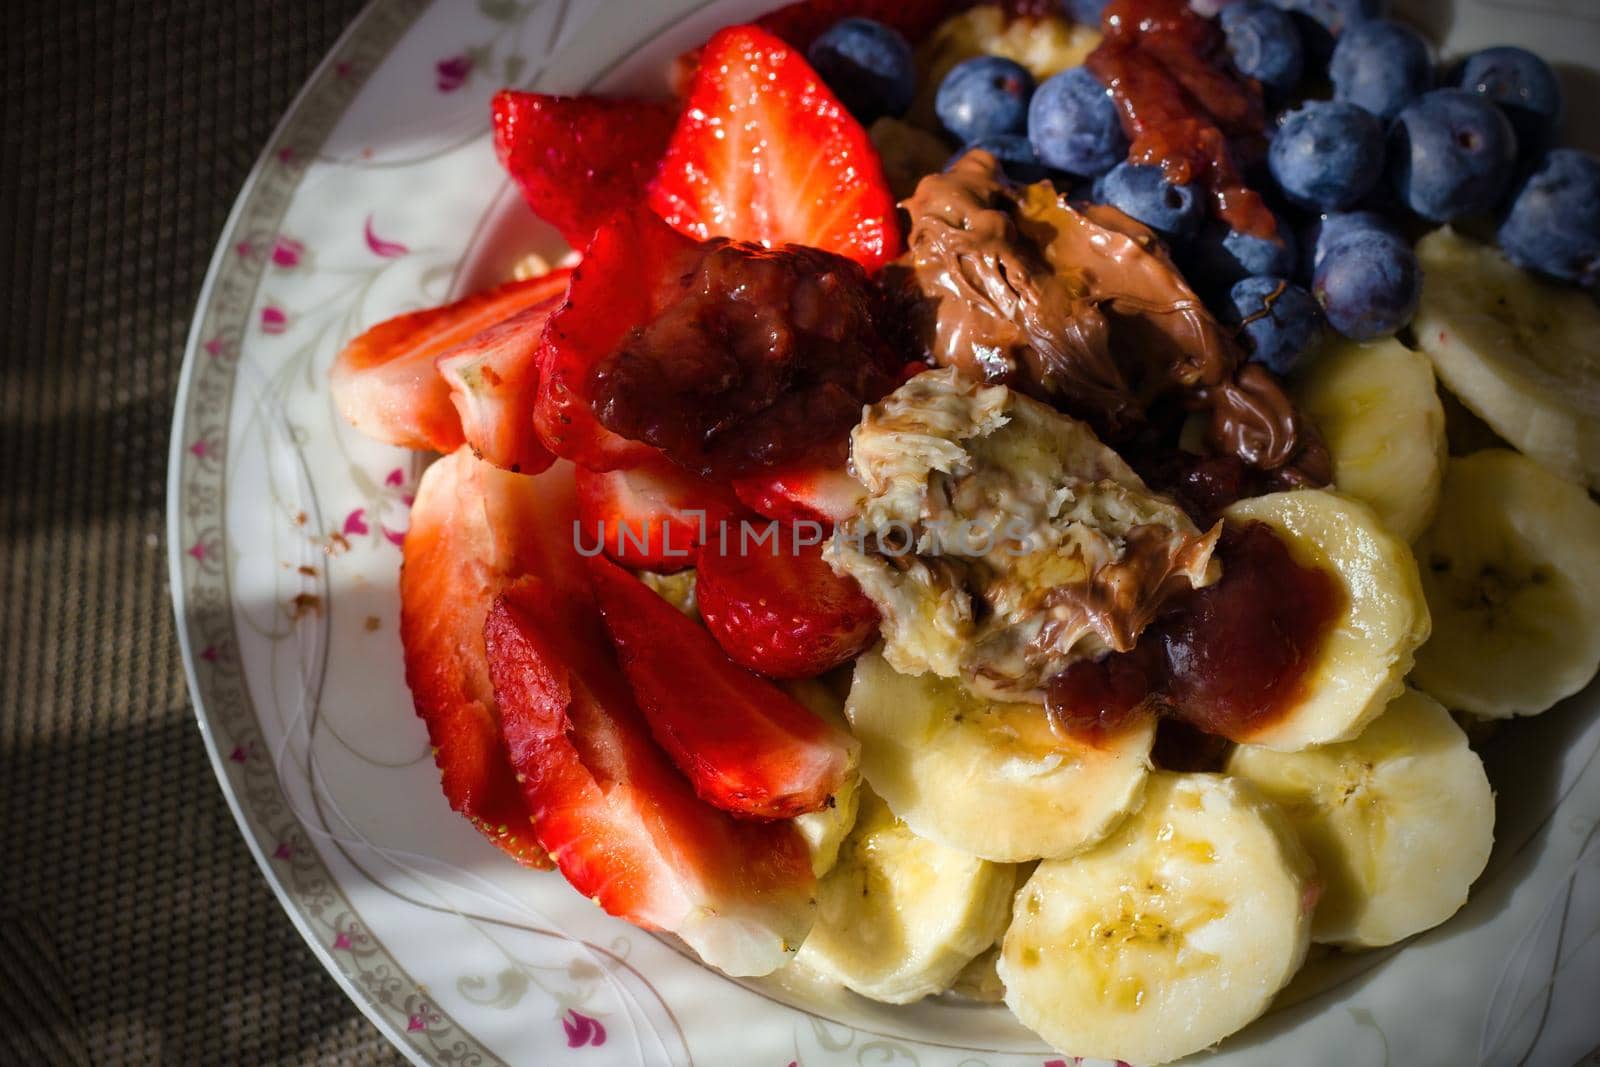 Close up shot of a healthy fruits such as banana, strawberries, blueberries on oats with milk with chocolate and hazelnut cream on top. Healthy morning breakfast concept by arpanbhatia